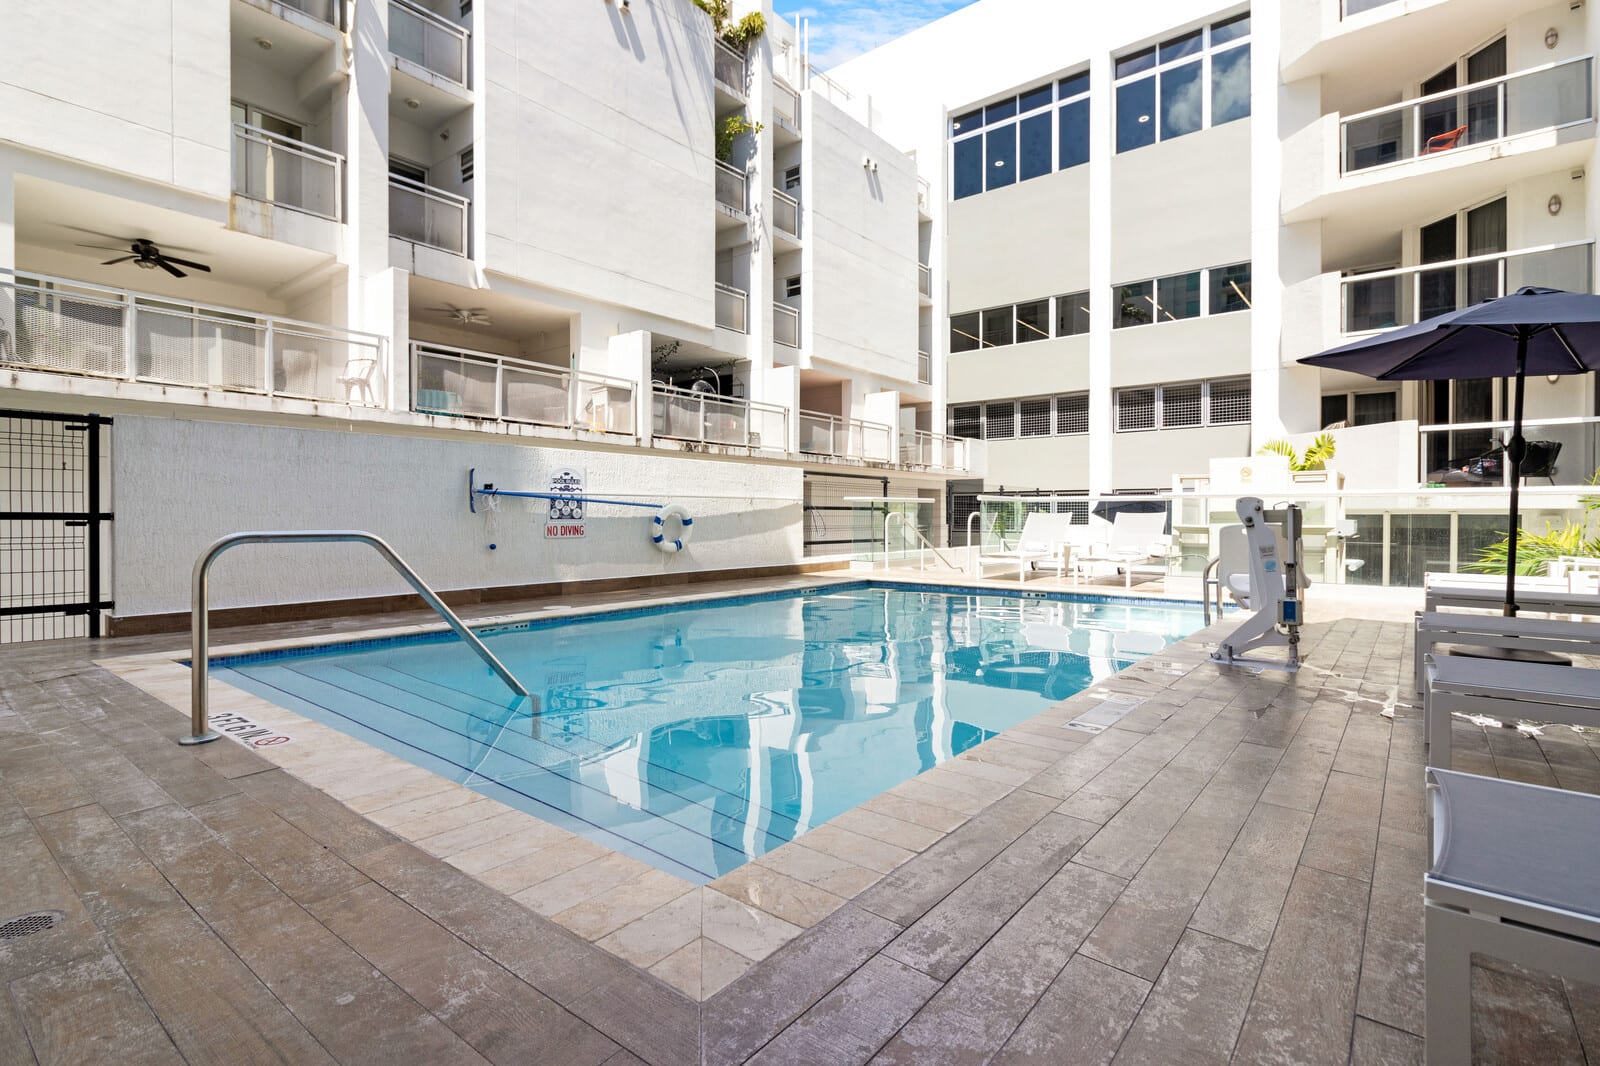 Property Image 2 - Property Manager | 10min to Beach | Penthouse+Pool | Brickell